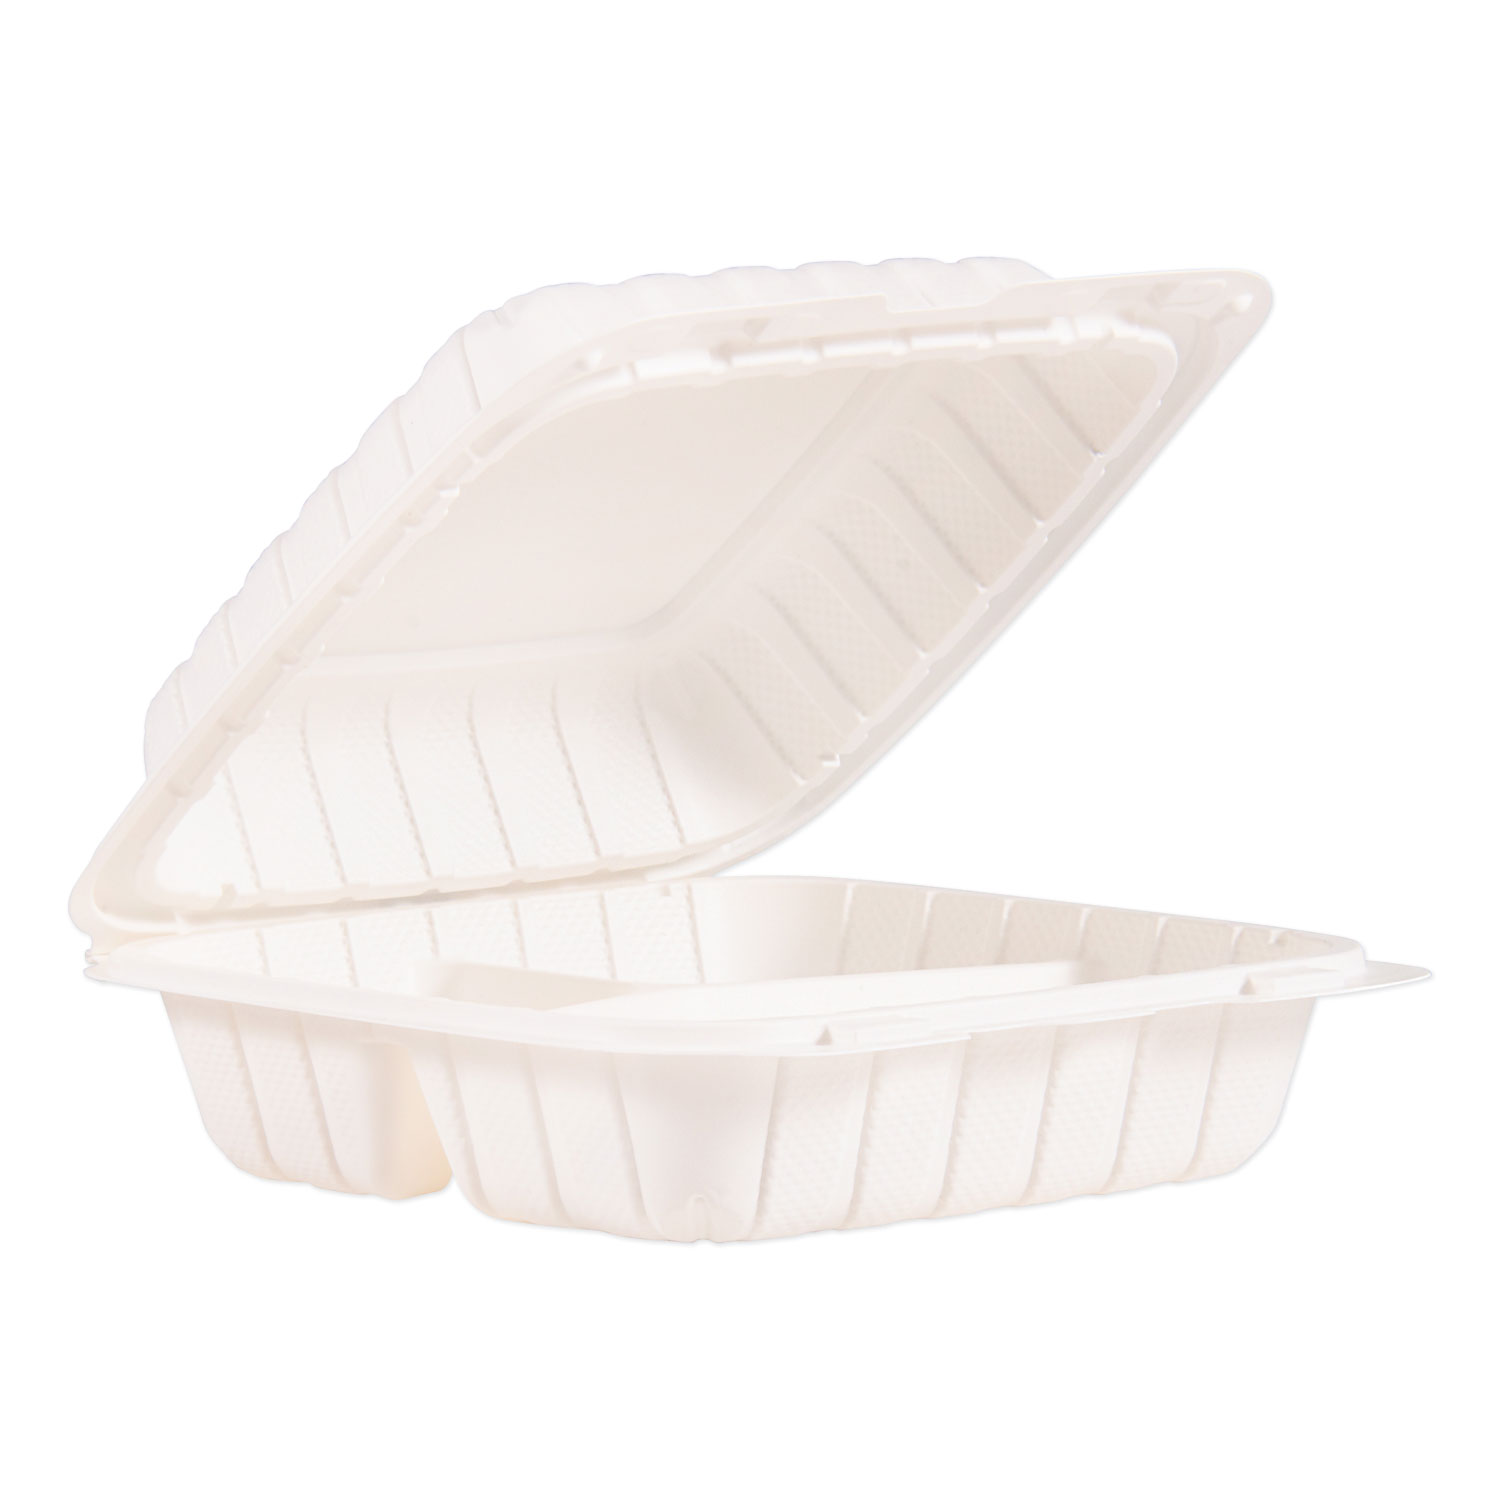  ProPlanet by Dart 85MFPPHT3 Hinged Lid Three Compartment Containers, 8.3 x 8 x 3, White, 150/Carton (DCC85MFPPHT3) 